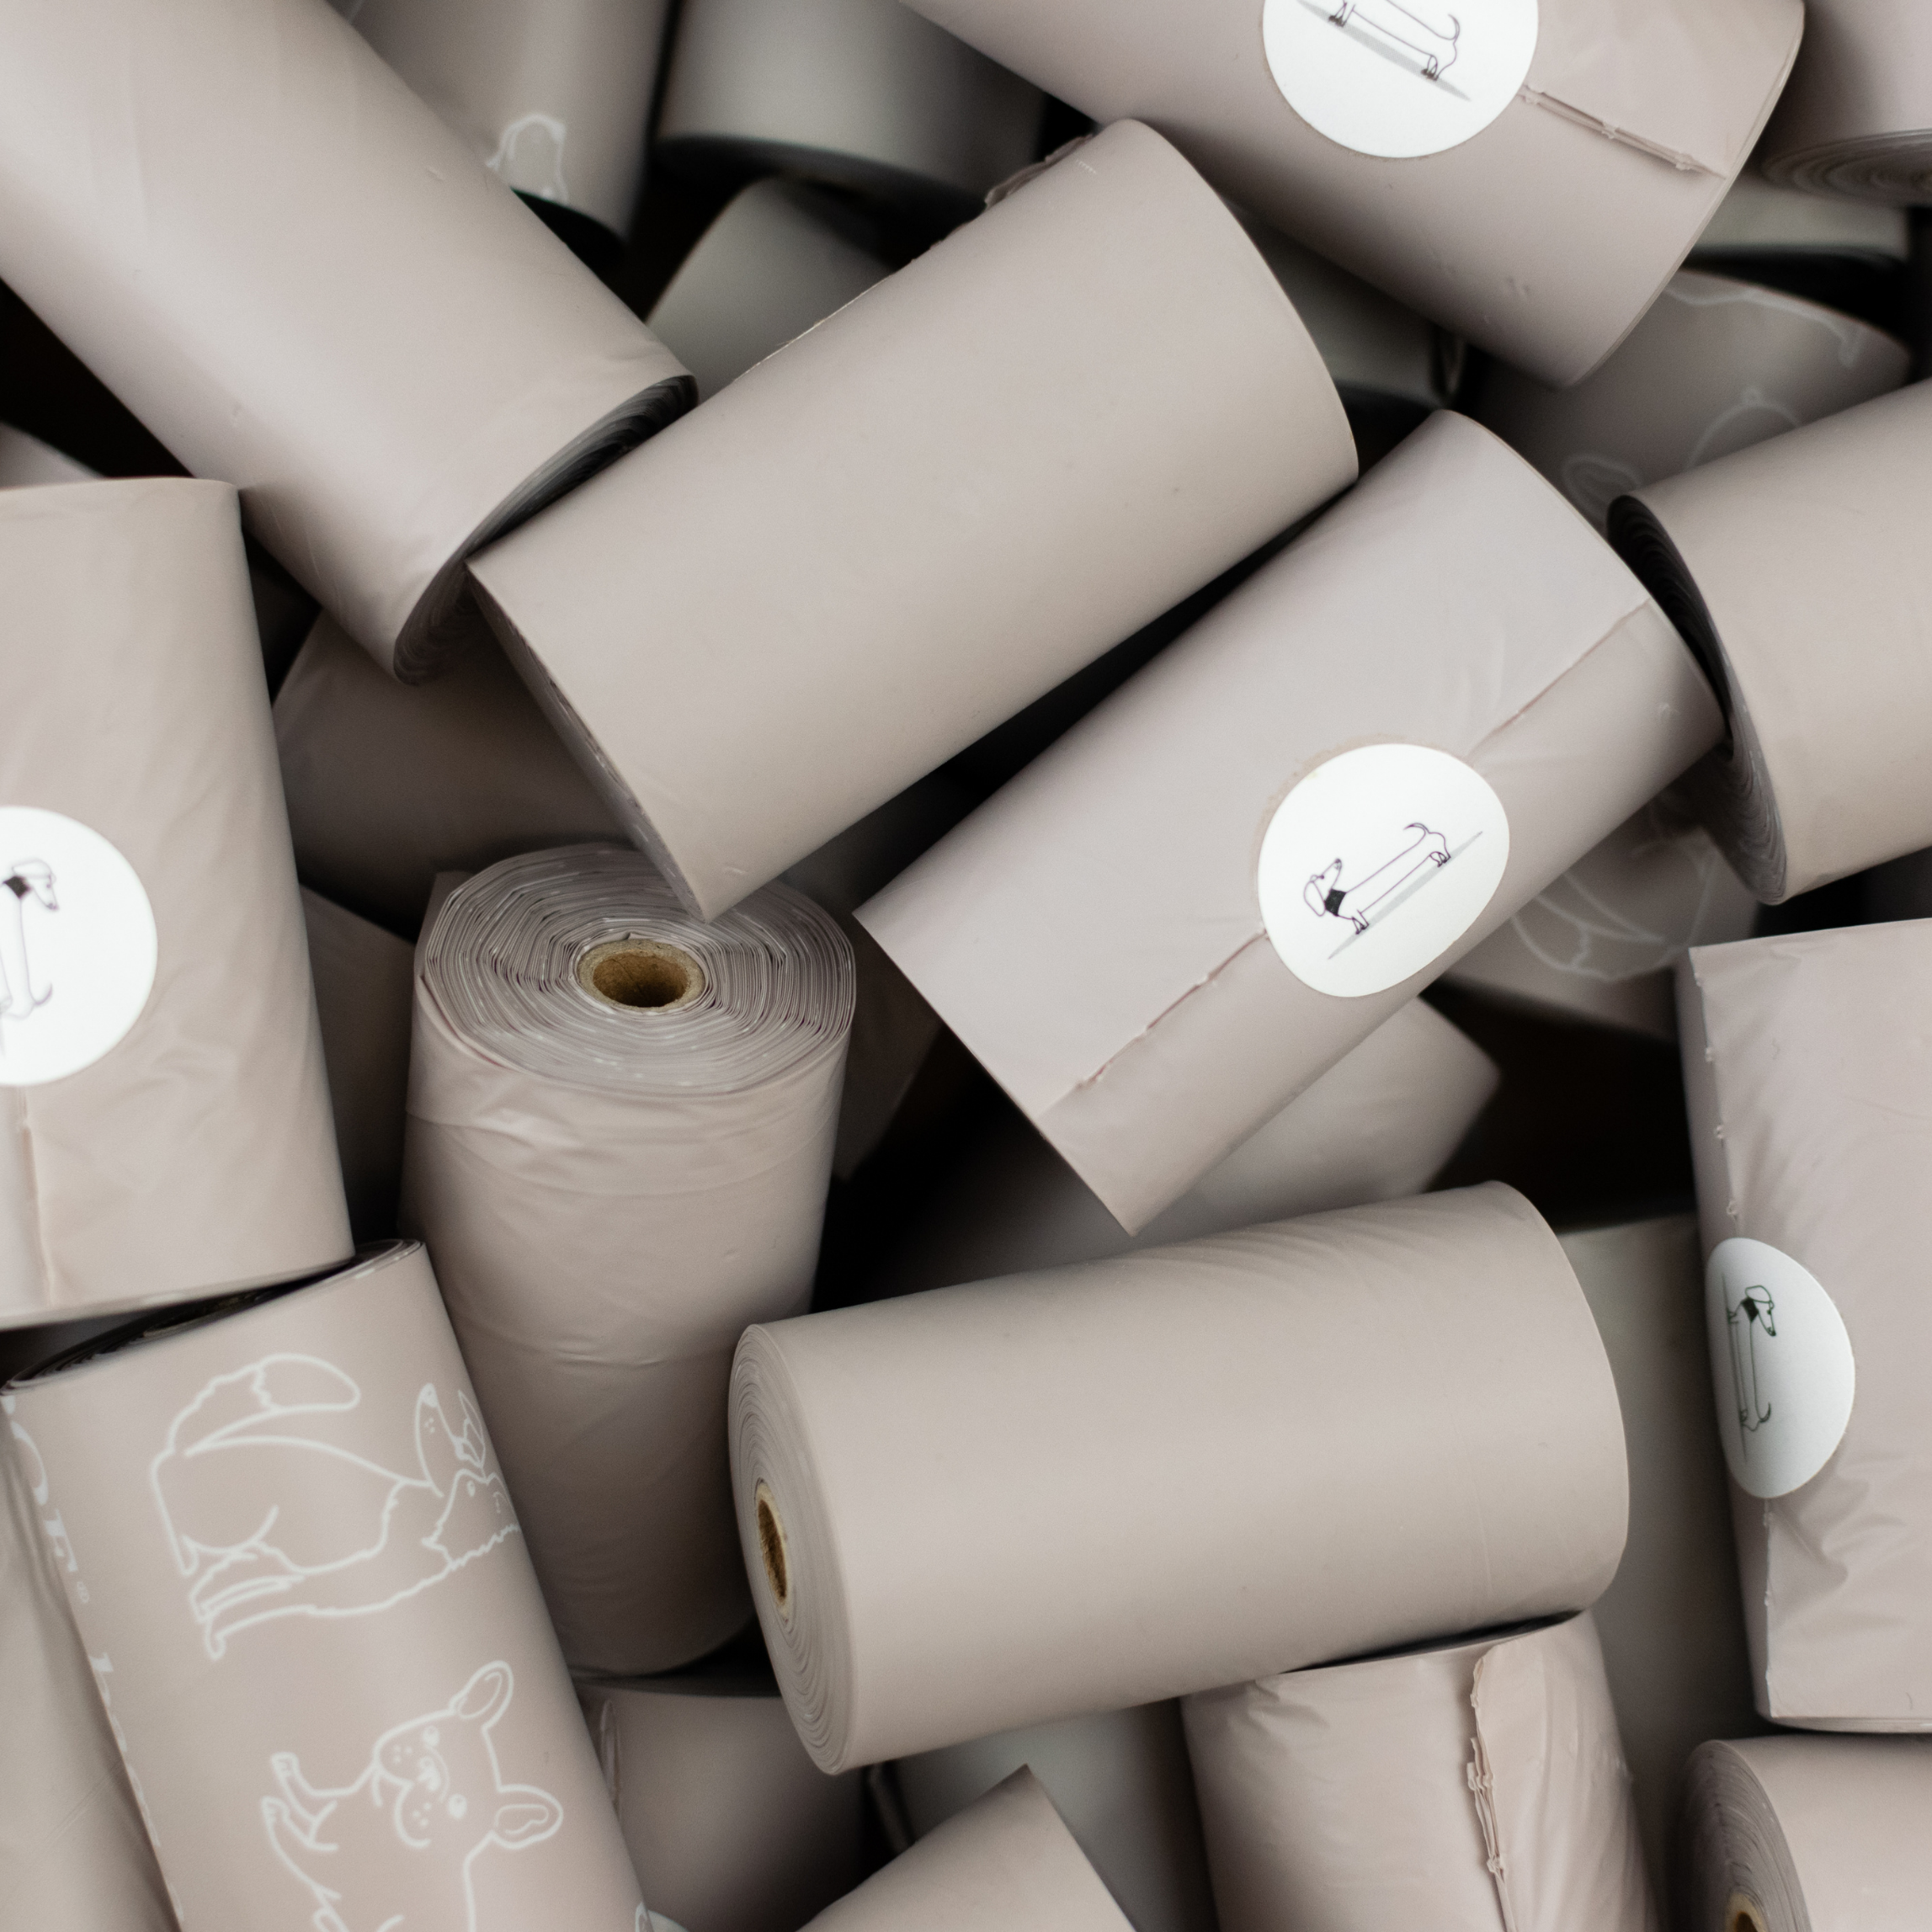 Waste Bags - 180 bags (12 rolls) - Biodegradable and Compostable